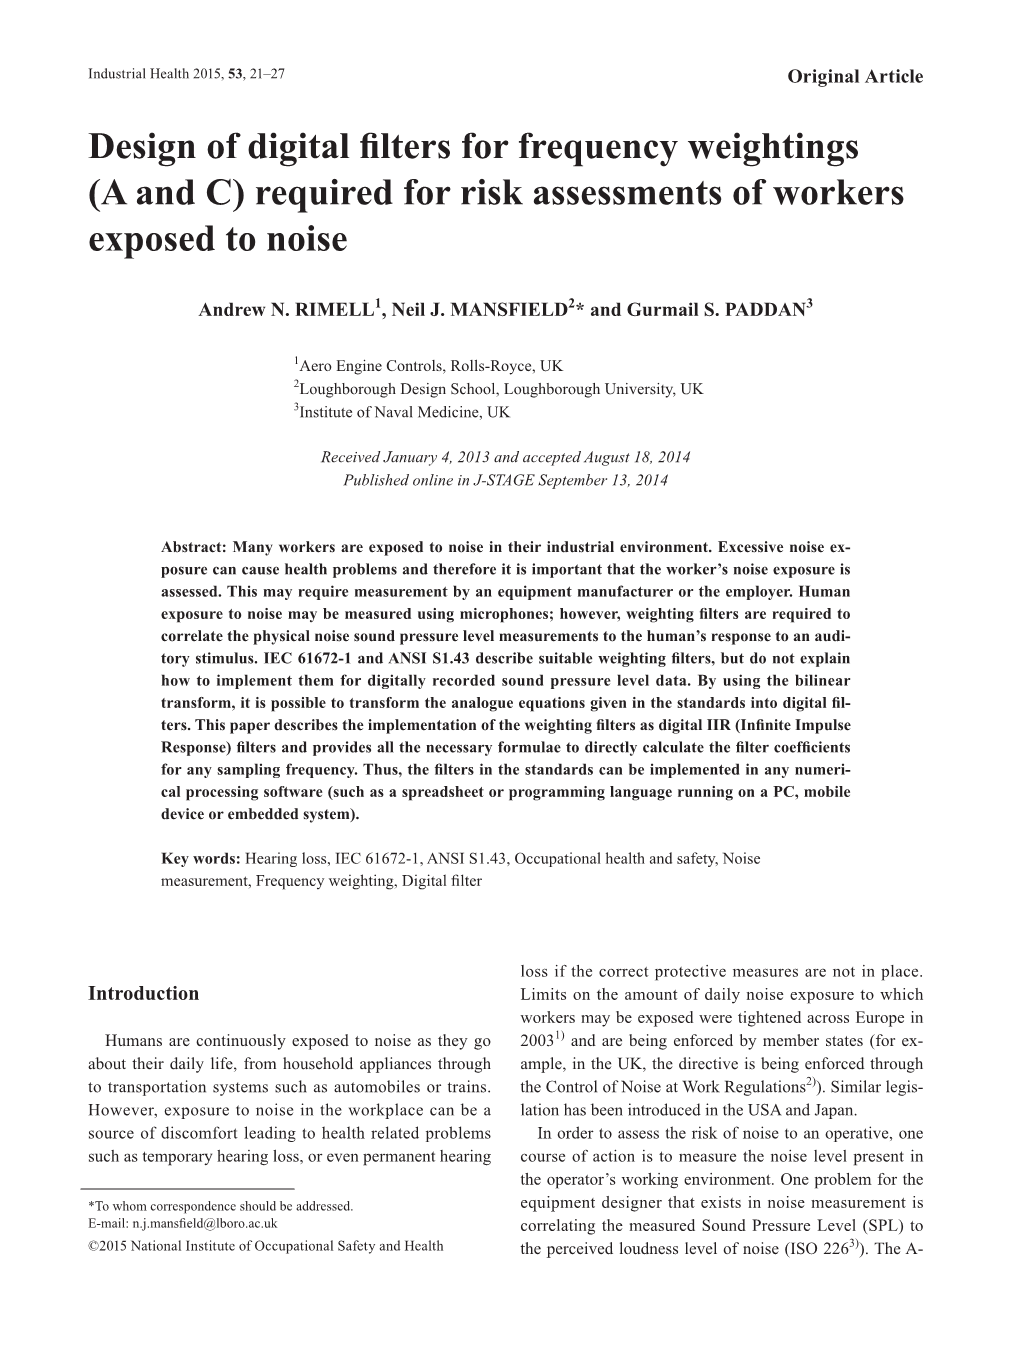 Design of Digital Filters for Frequency Weightings (A and C) Required for Risk Assessments of Workers Exposed to Noise